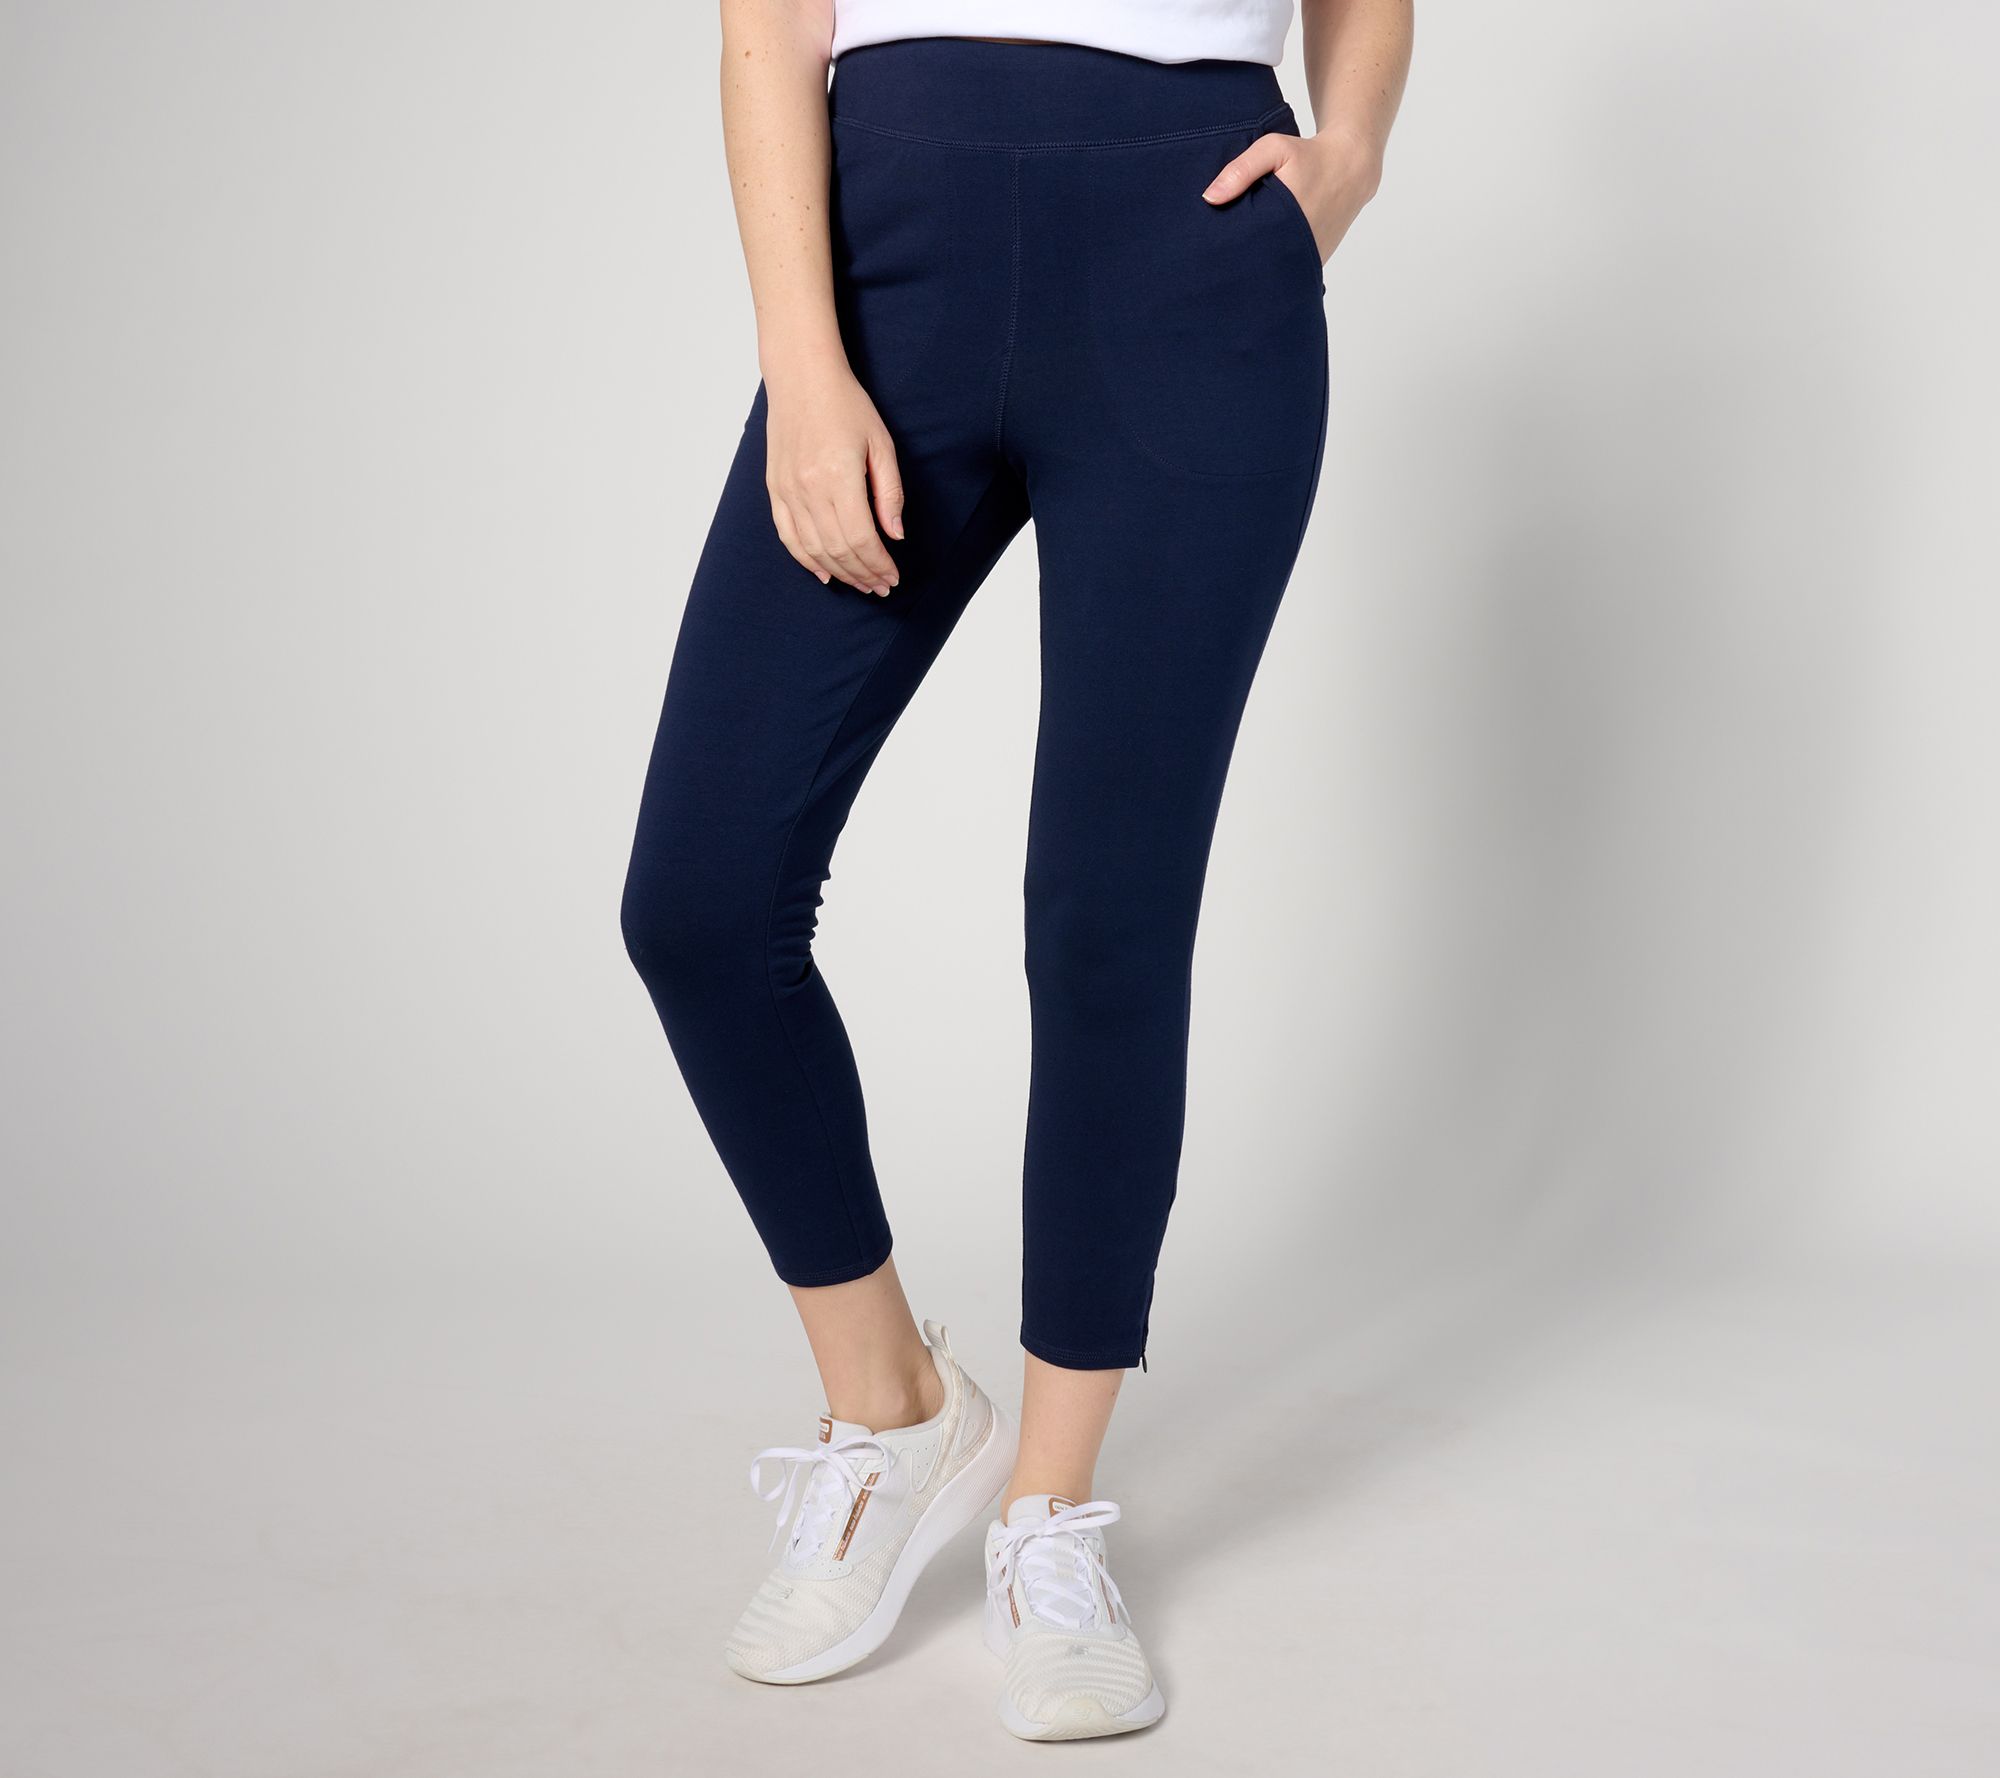  Navy Anchor Women's High Waisted Yoga Pants with Pocket Workout  Leggings : Clothing, Shoes & Jewelry